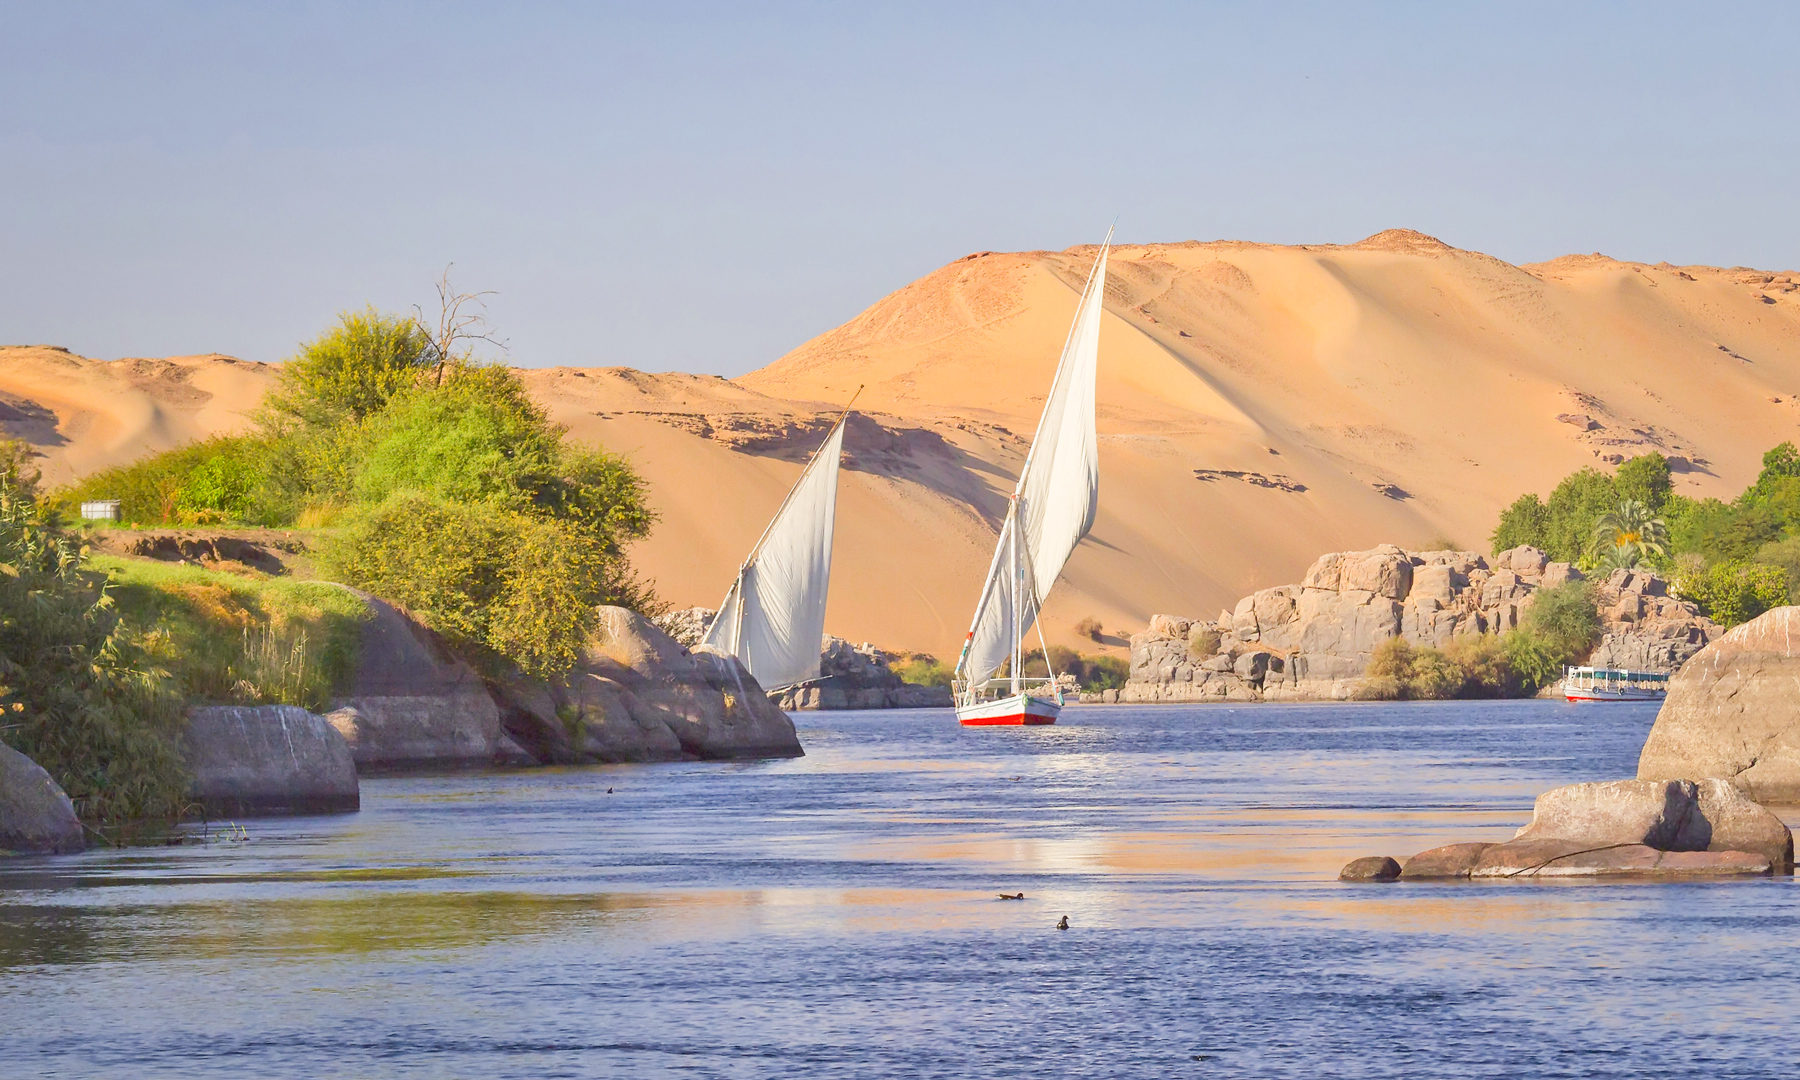 Best Nile Cruises in Egypt: Luxury Nile River Cruises From Luxor to Aswan